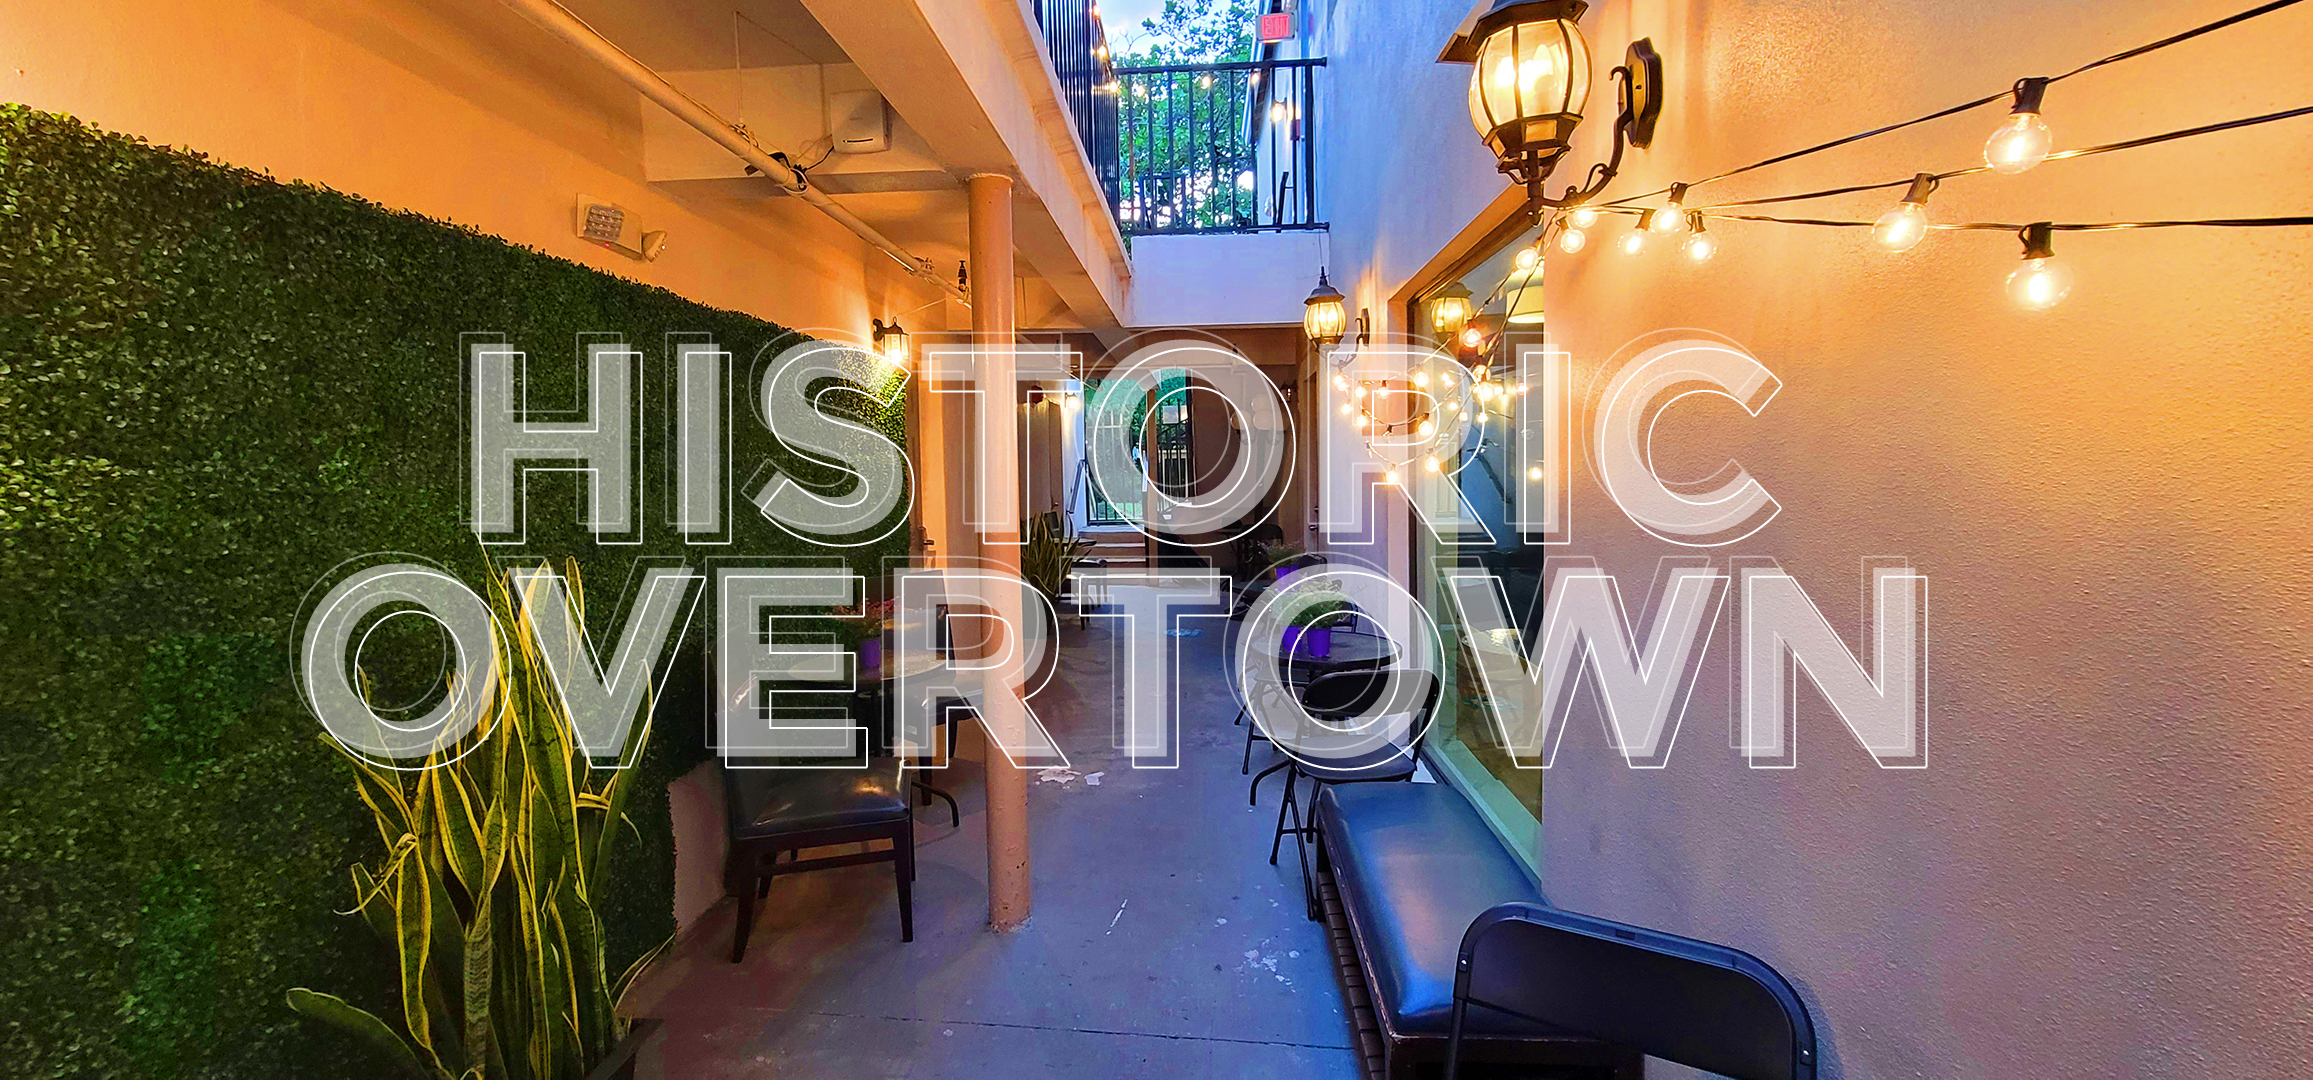 Image of exterior walkway with artificial greenery on left wall with string light on the right wall with the words HISTORIC OVERTOWN in the center.